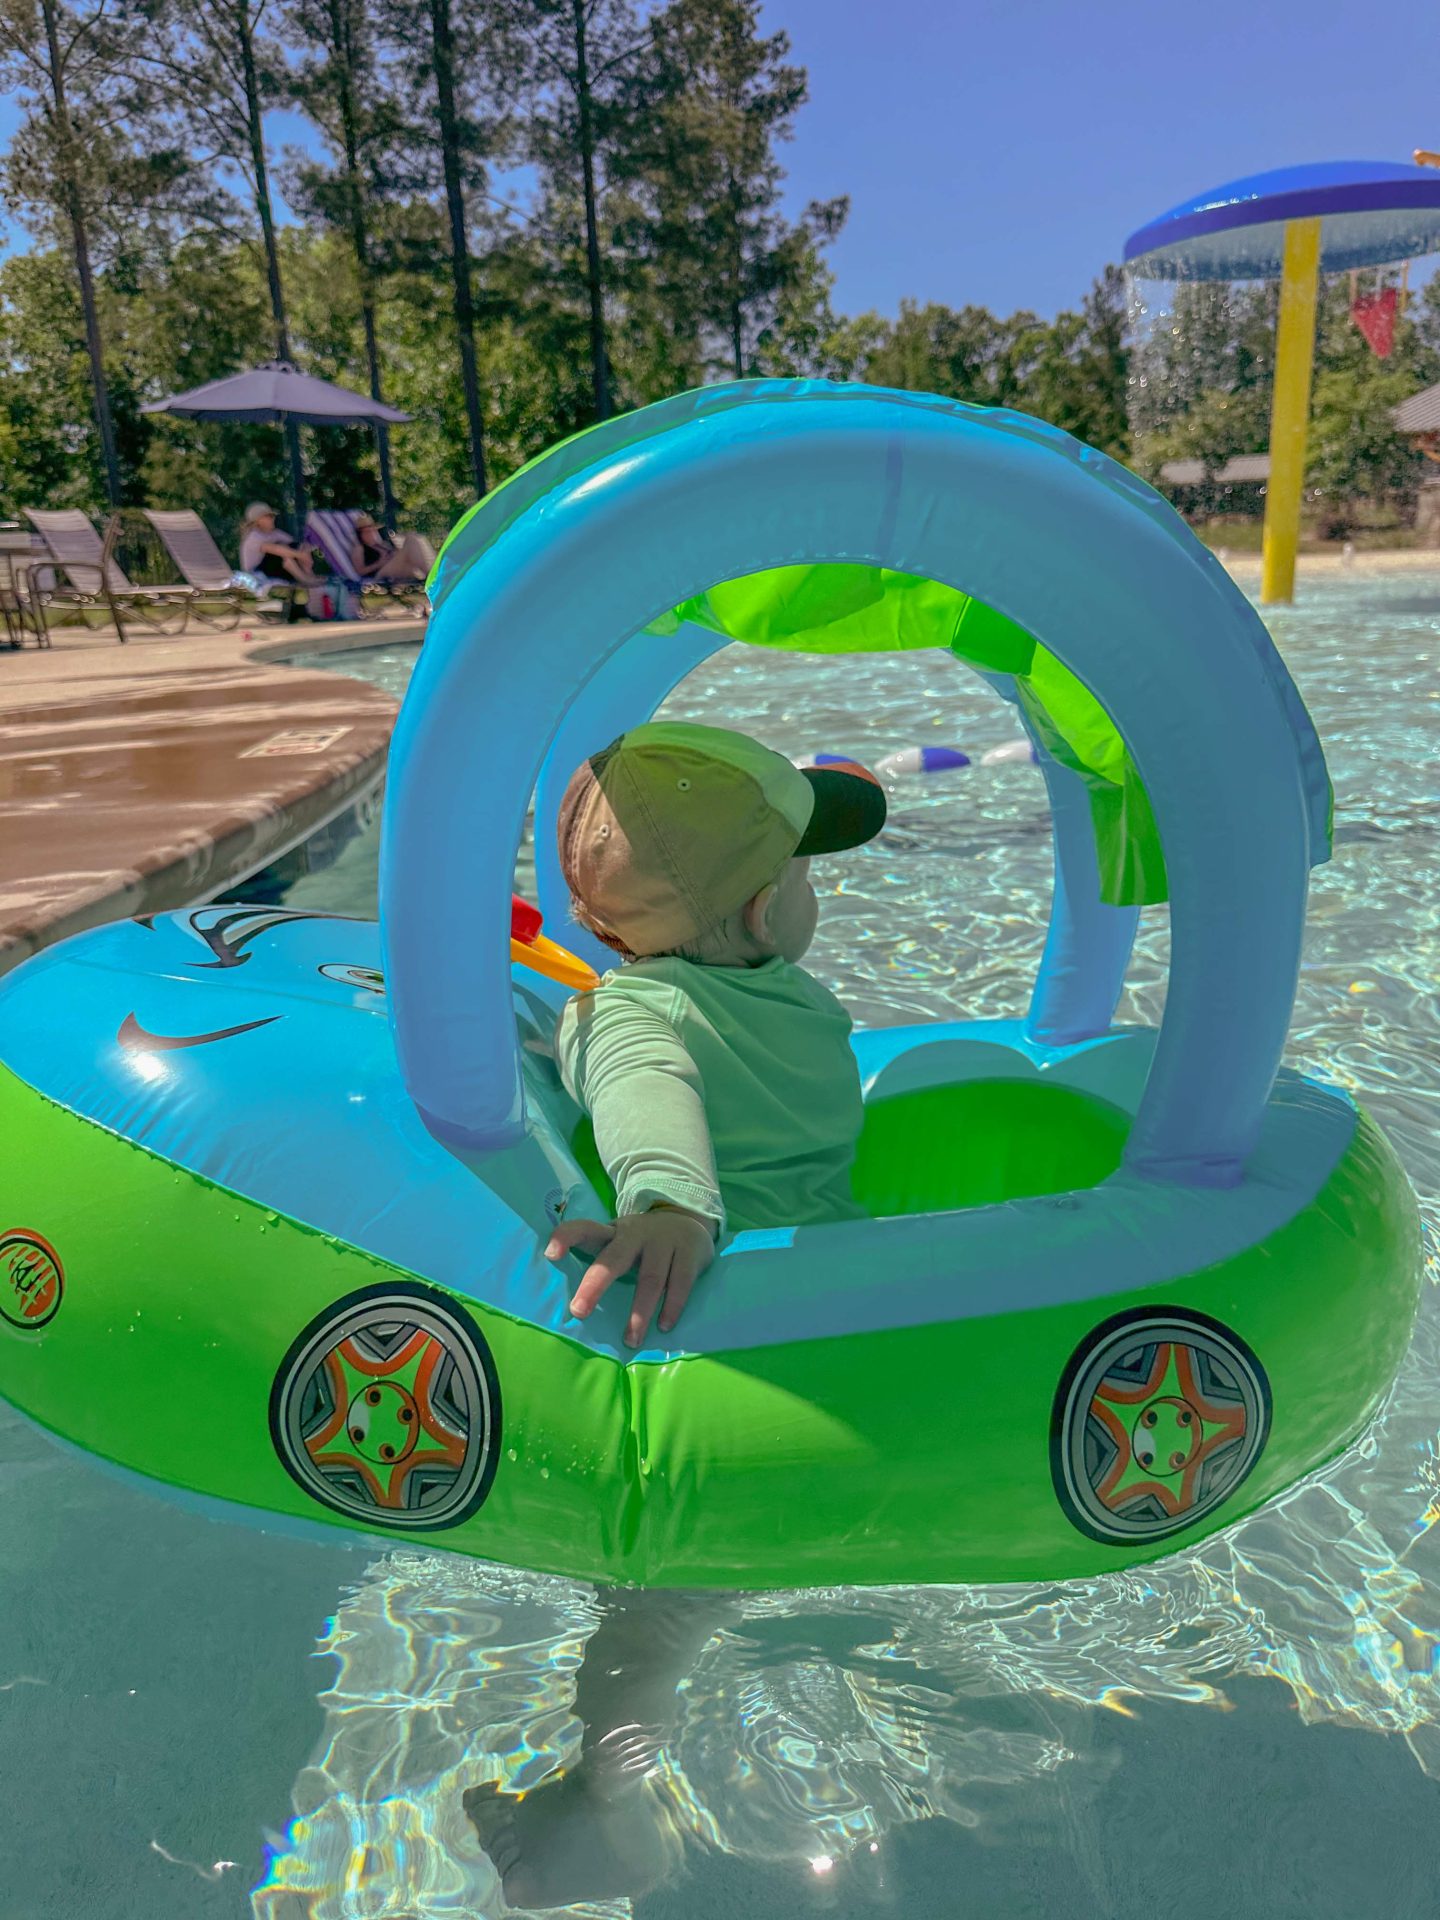 baby and mommy pool day, pool snacks, what to pack to the pool, summer fun, summer with toddler, mommy and me, pool time, south Carolina, summer fun, lifestyle blogger